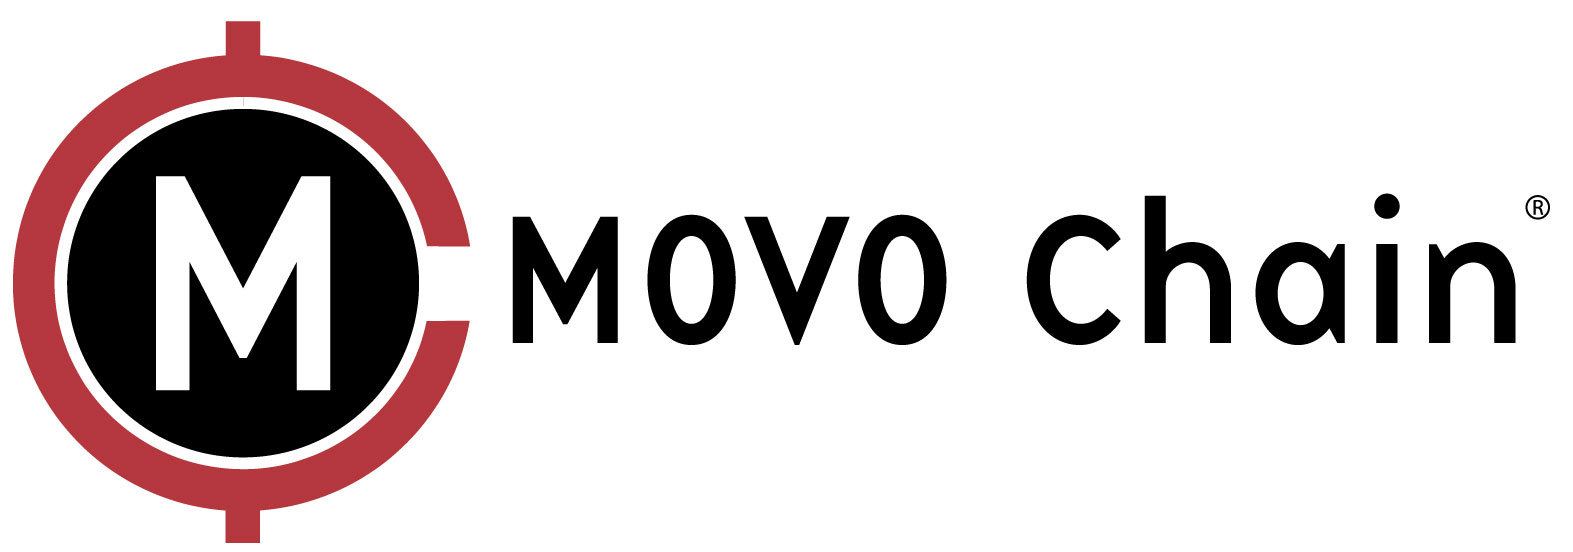 Buy Verified Movocash Accounts